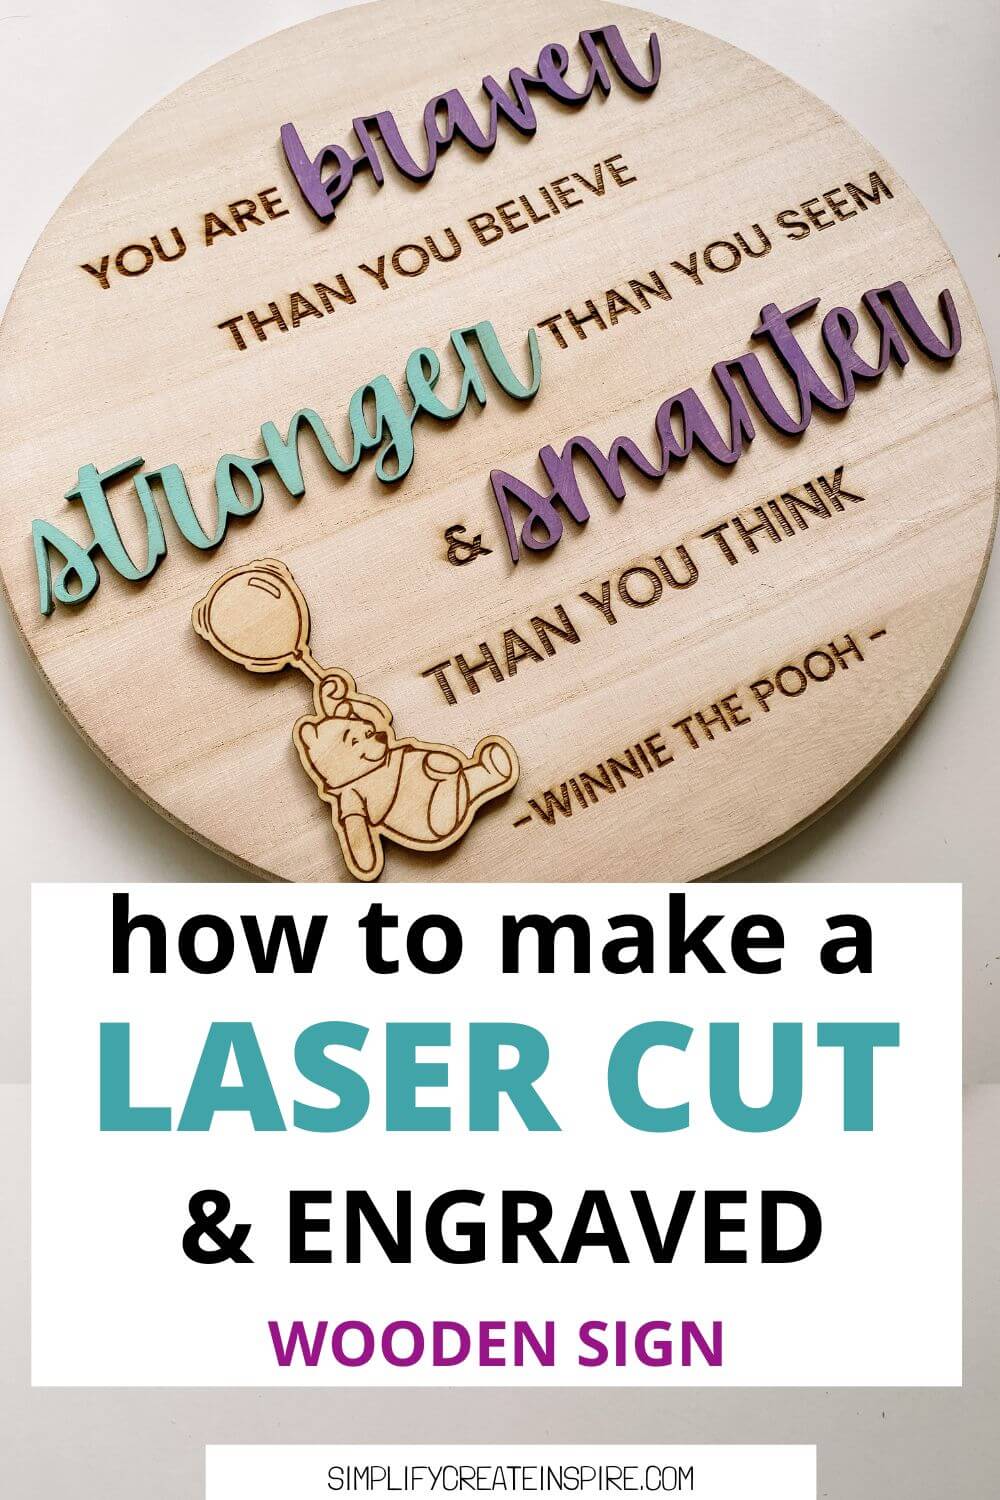 Pinterest image - how to make laser cut wood signs